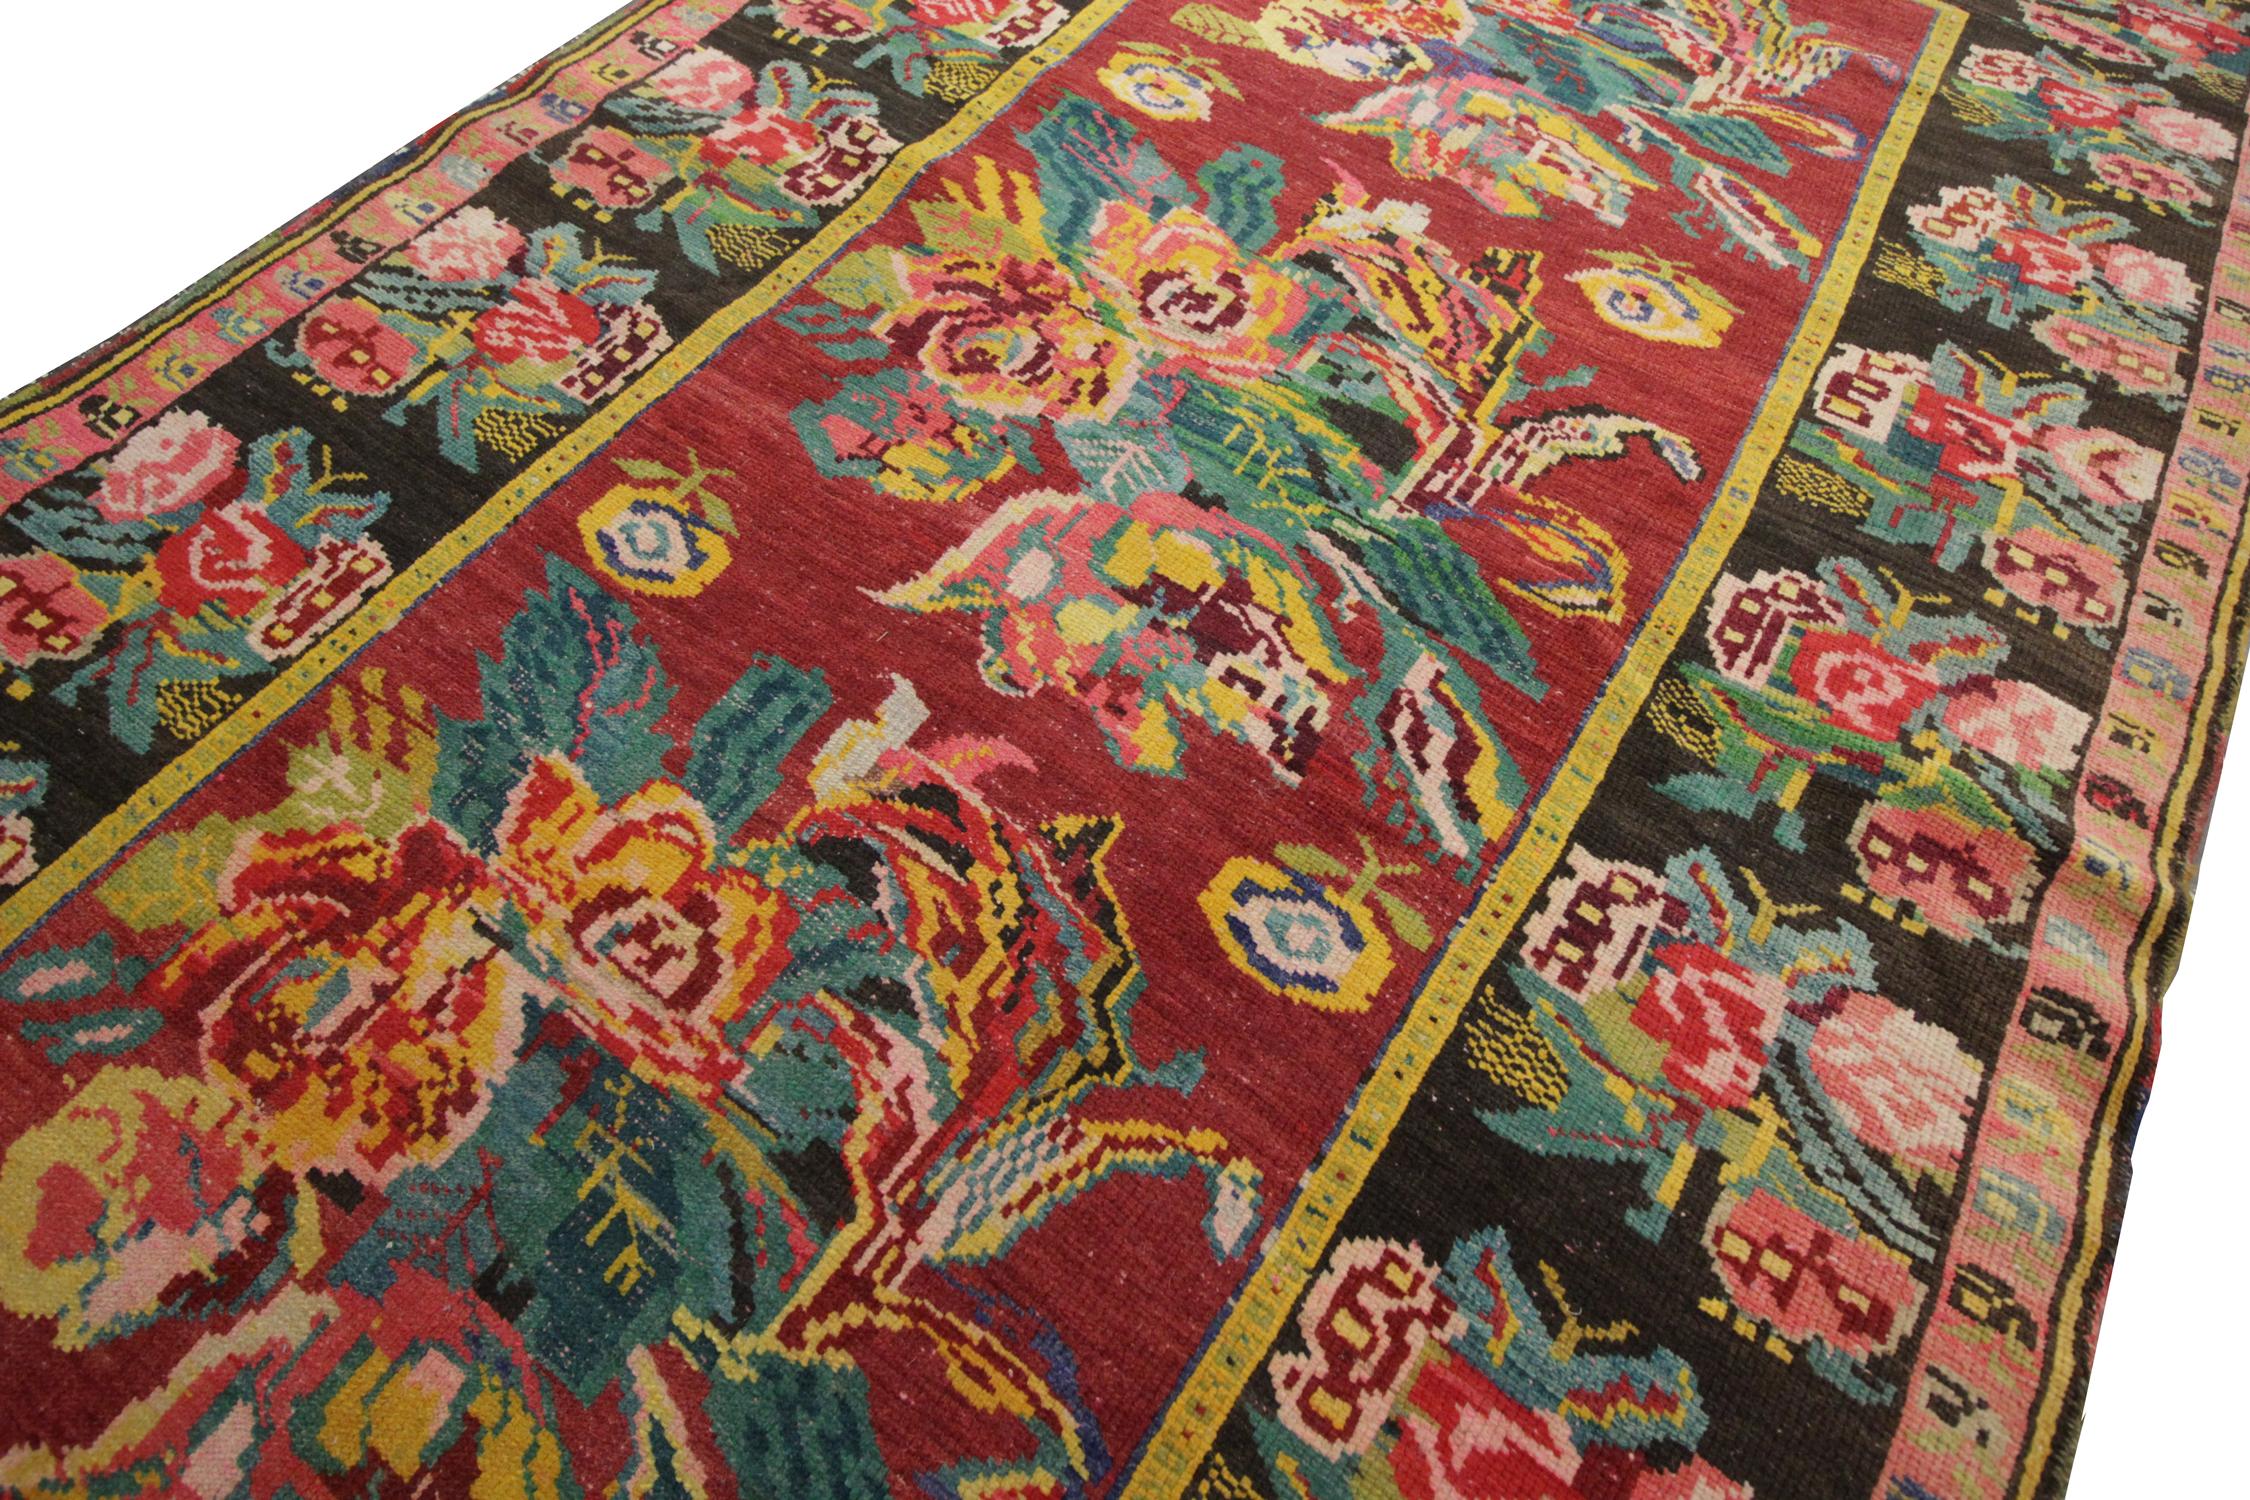 Vivid colours have been used in the construction of this handmade carpet large Karabagah area rug. Greens, pinks, reds and yellows have been handwoven into intricate floral arrangments, on contrasting backgrounds of black and deep red.
The Floral